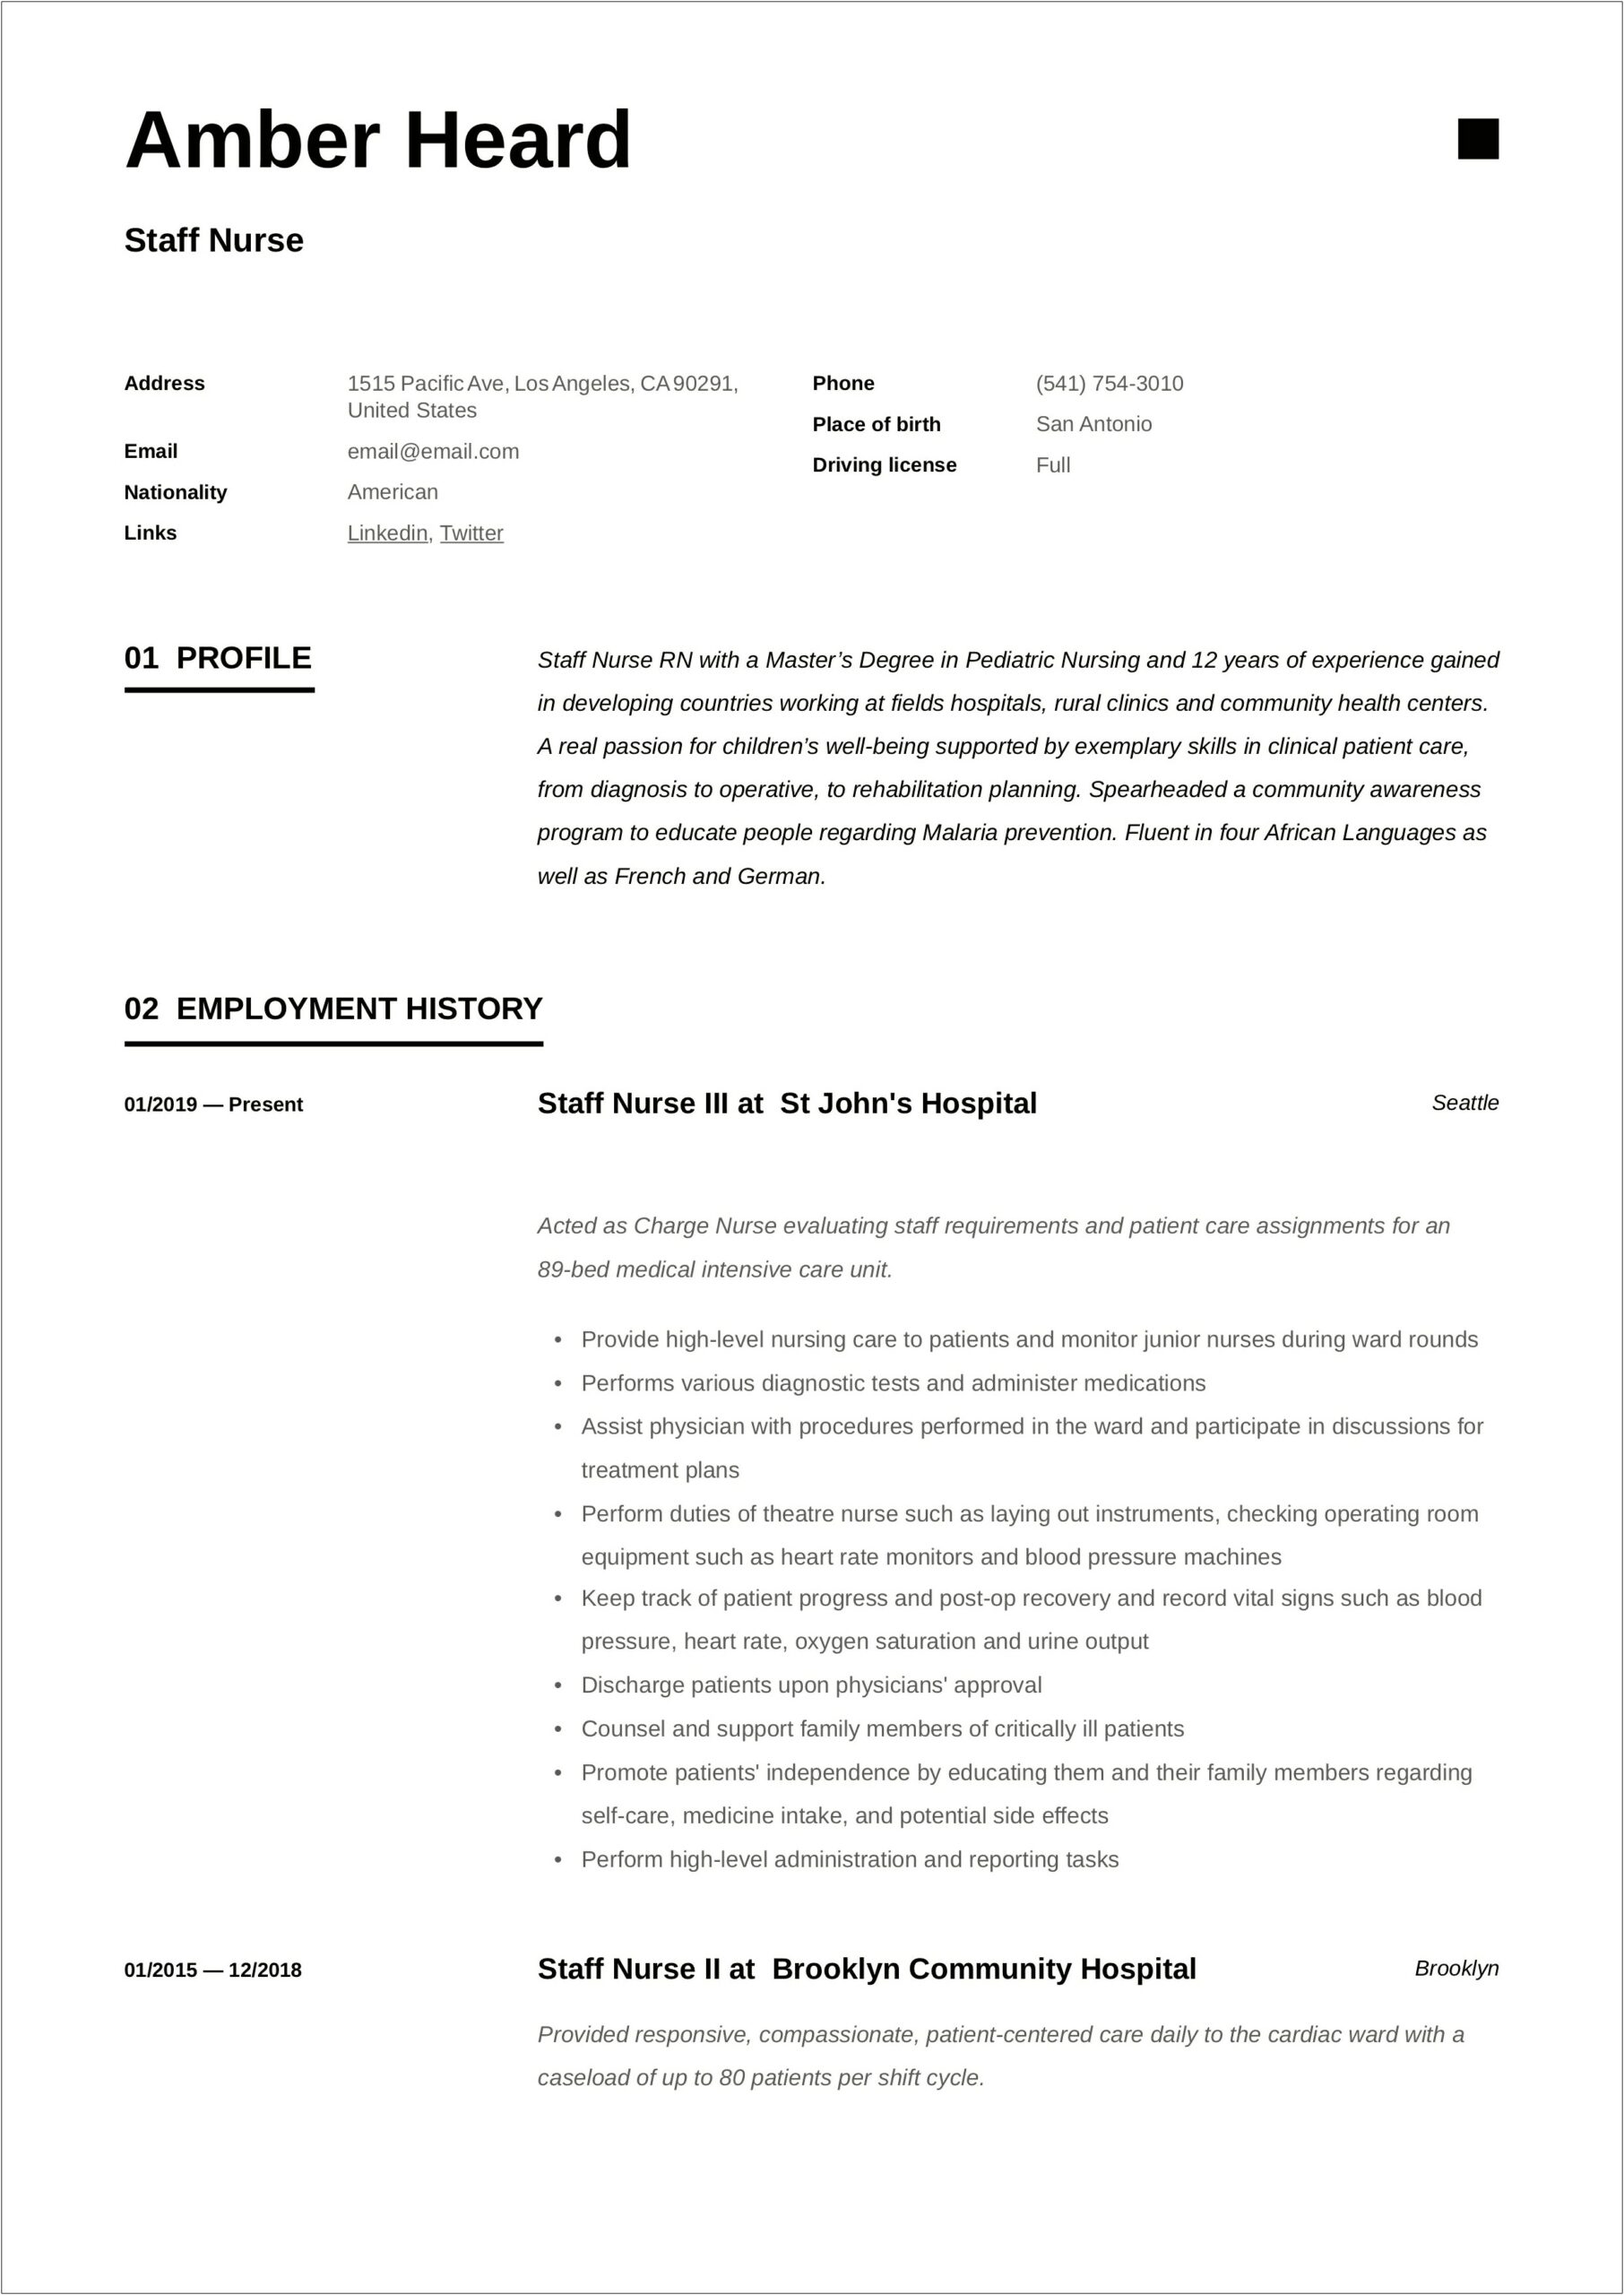 Sample Resume For Clinical Research Nurse